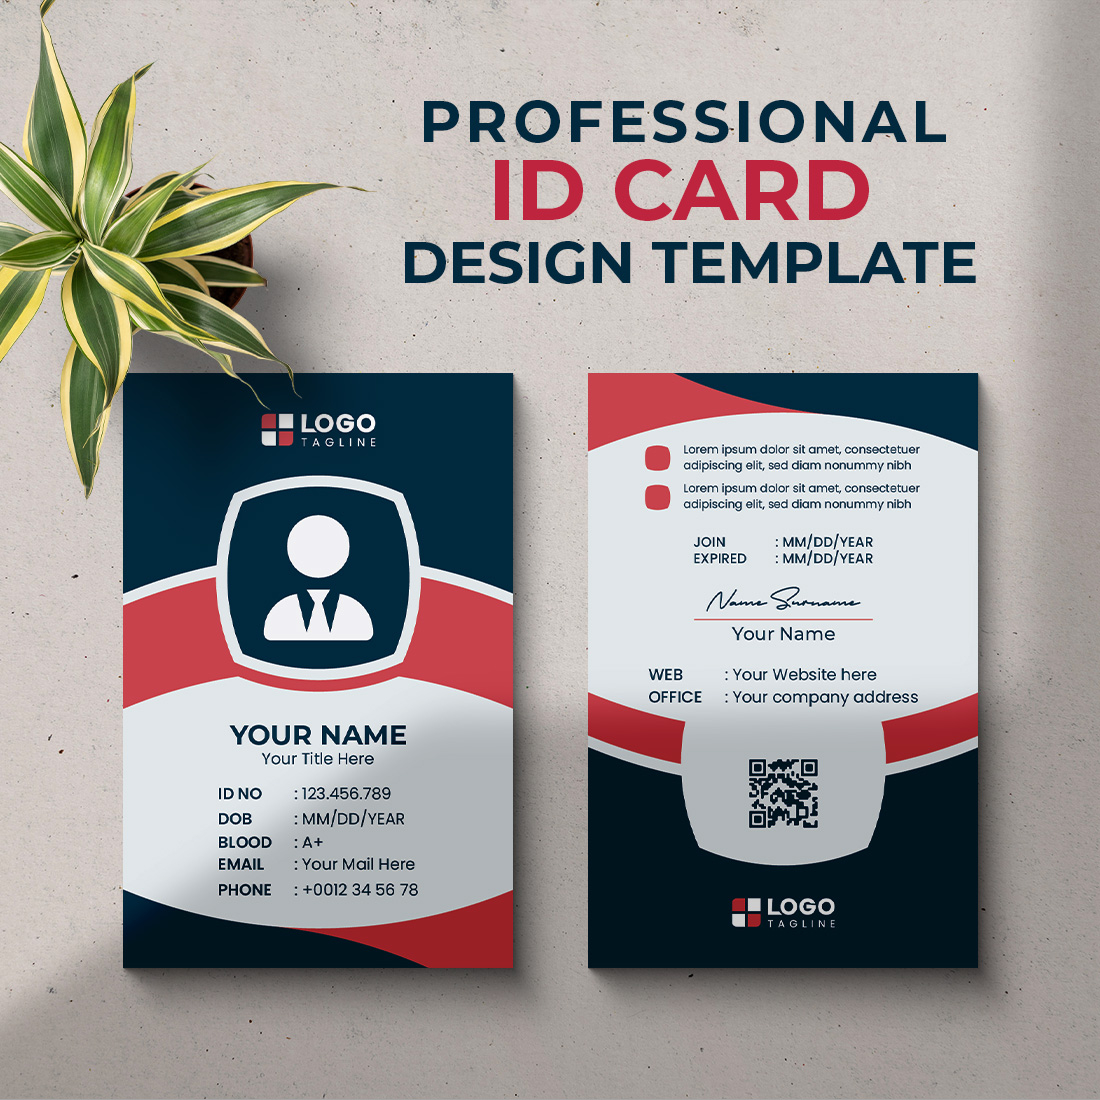 Professional id card design template with a plant.